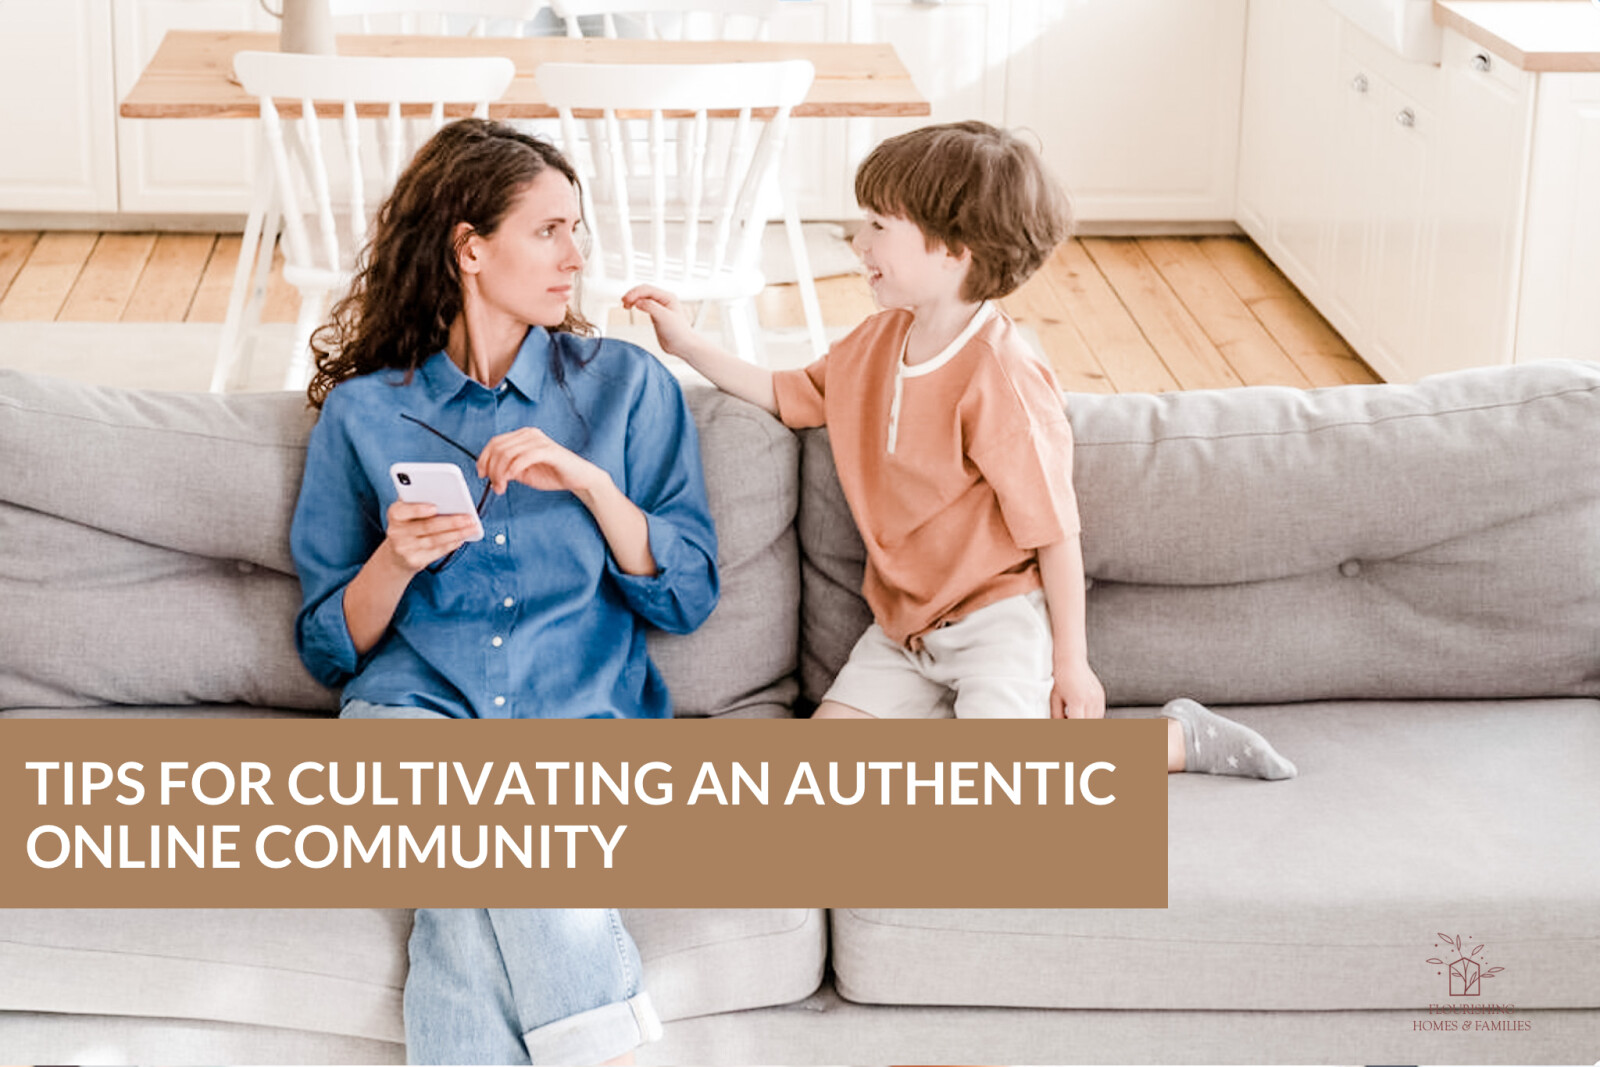 CULTIVATING AN AUTHENTIC ONLINE COMMUNITY